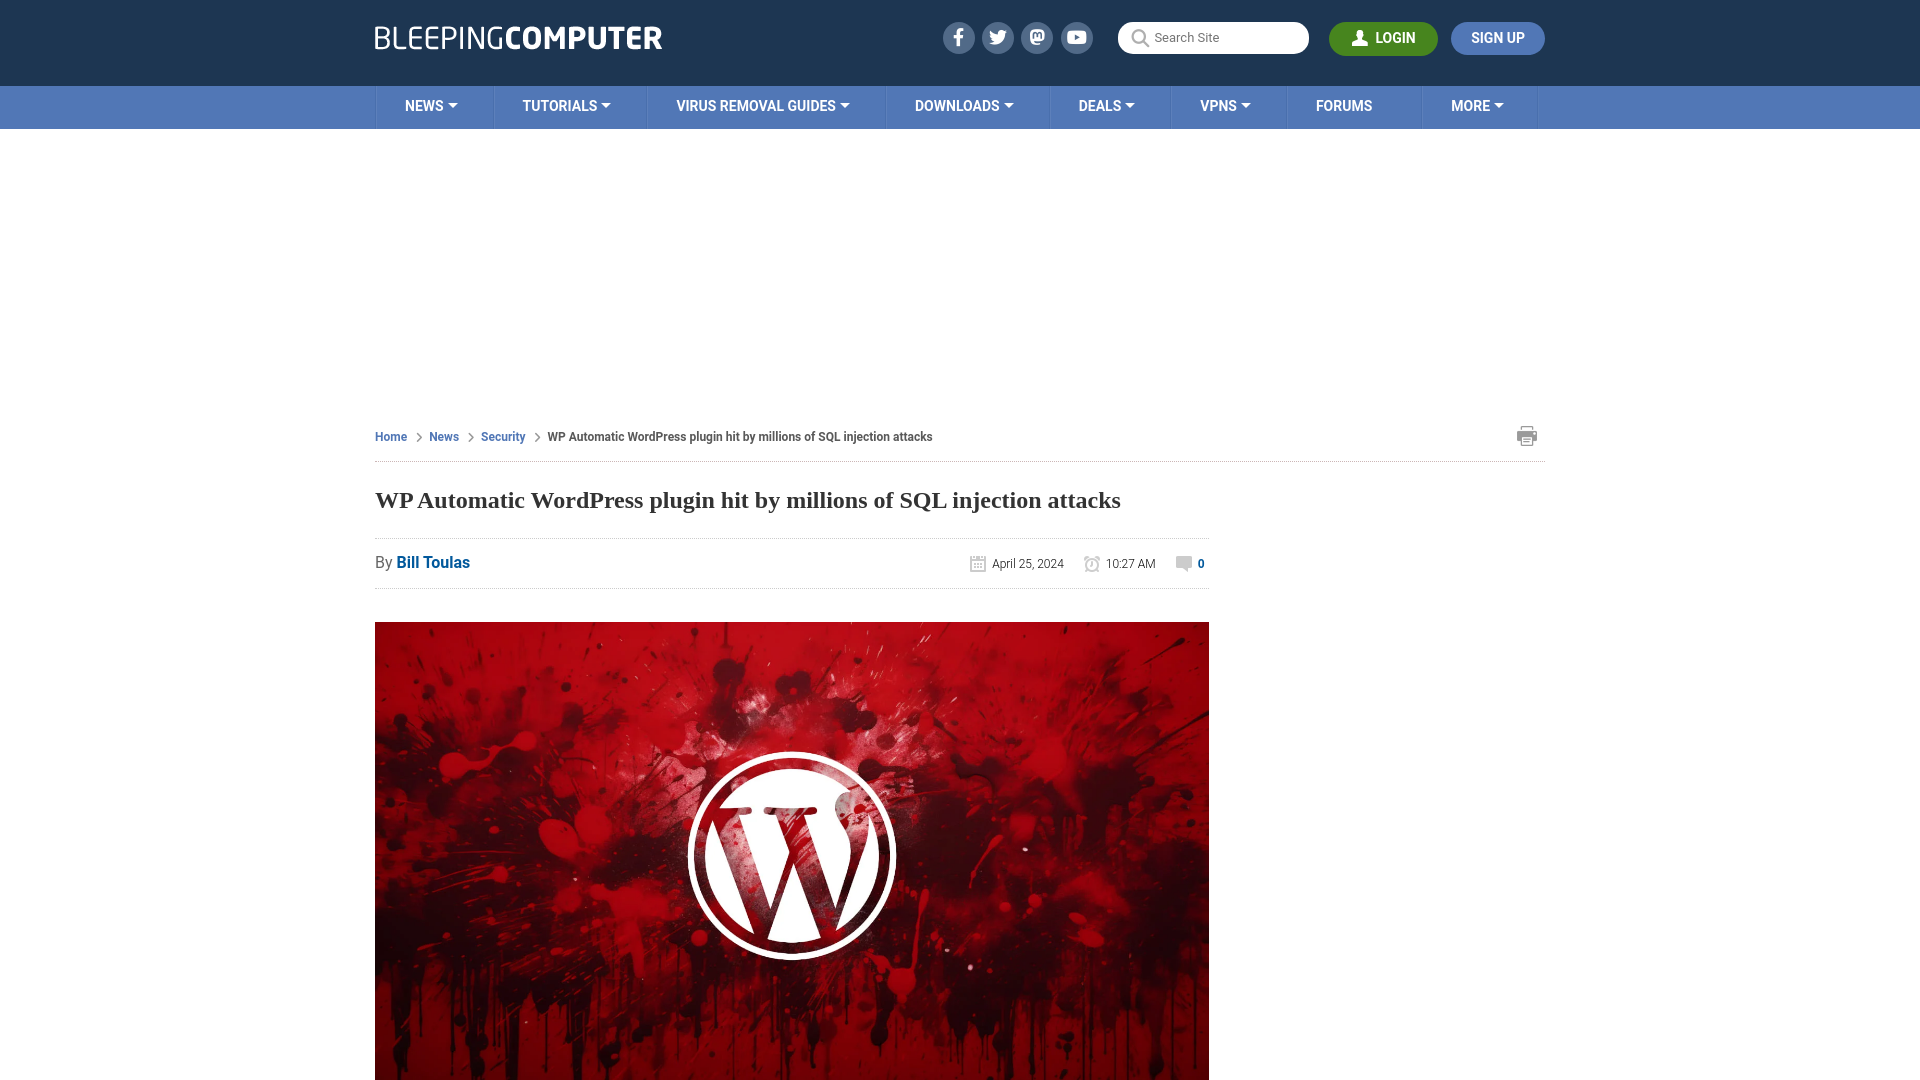 WP Automatic WordPress plugin hit by millions of SQL injection attacks